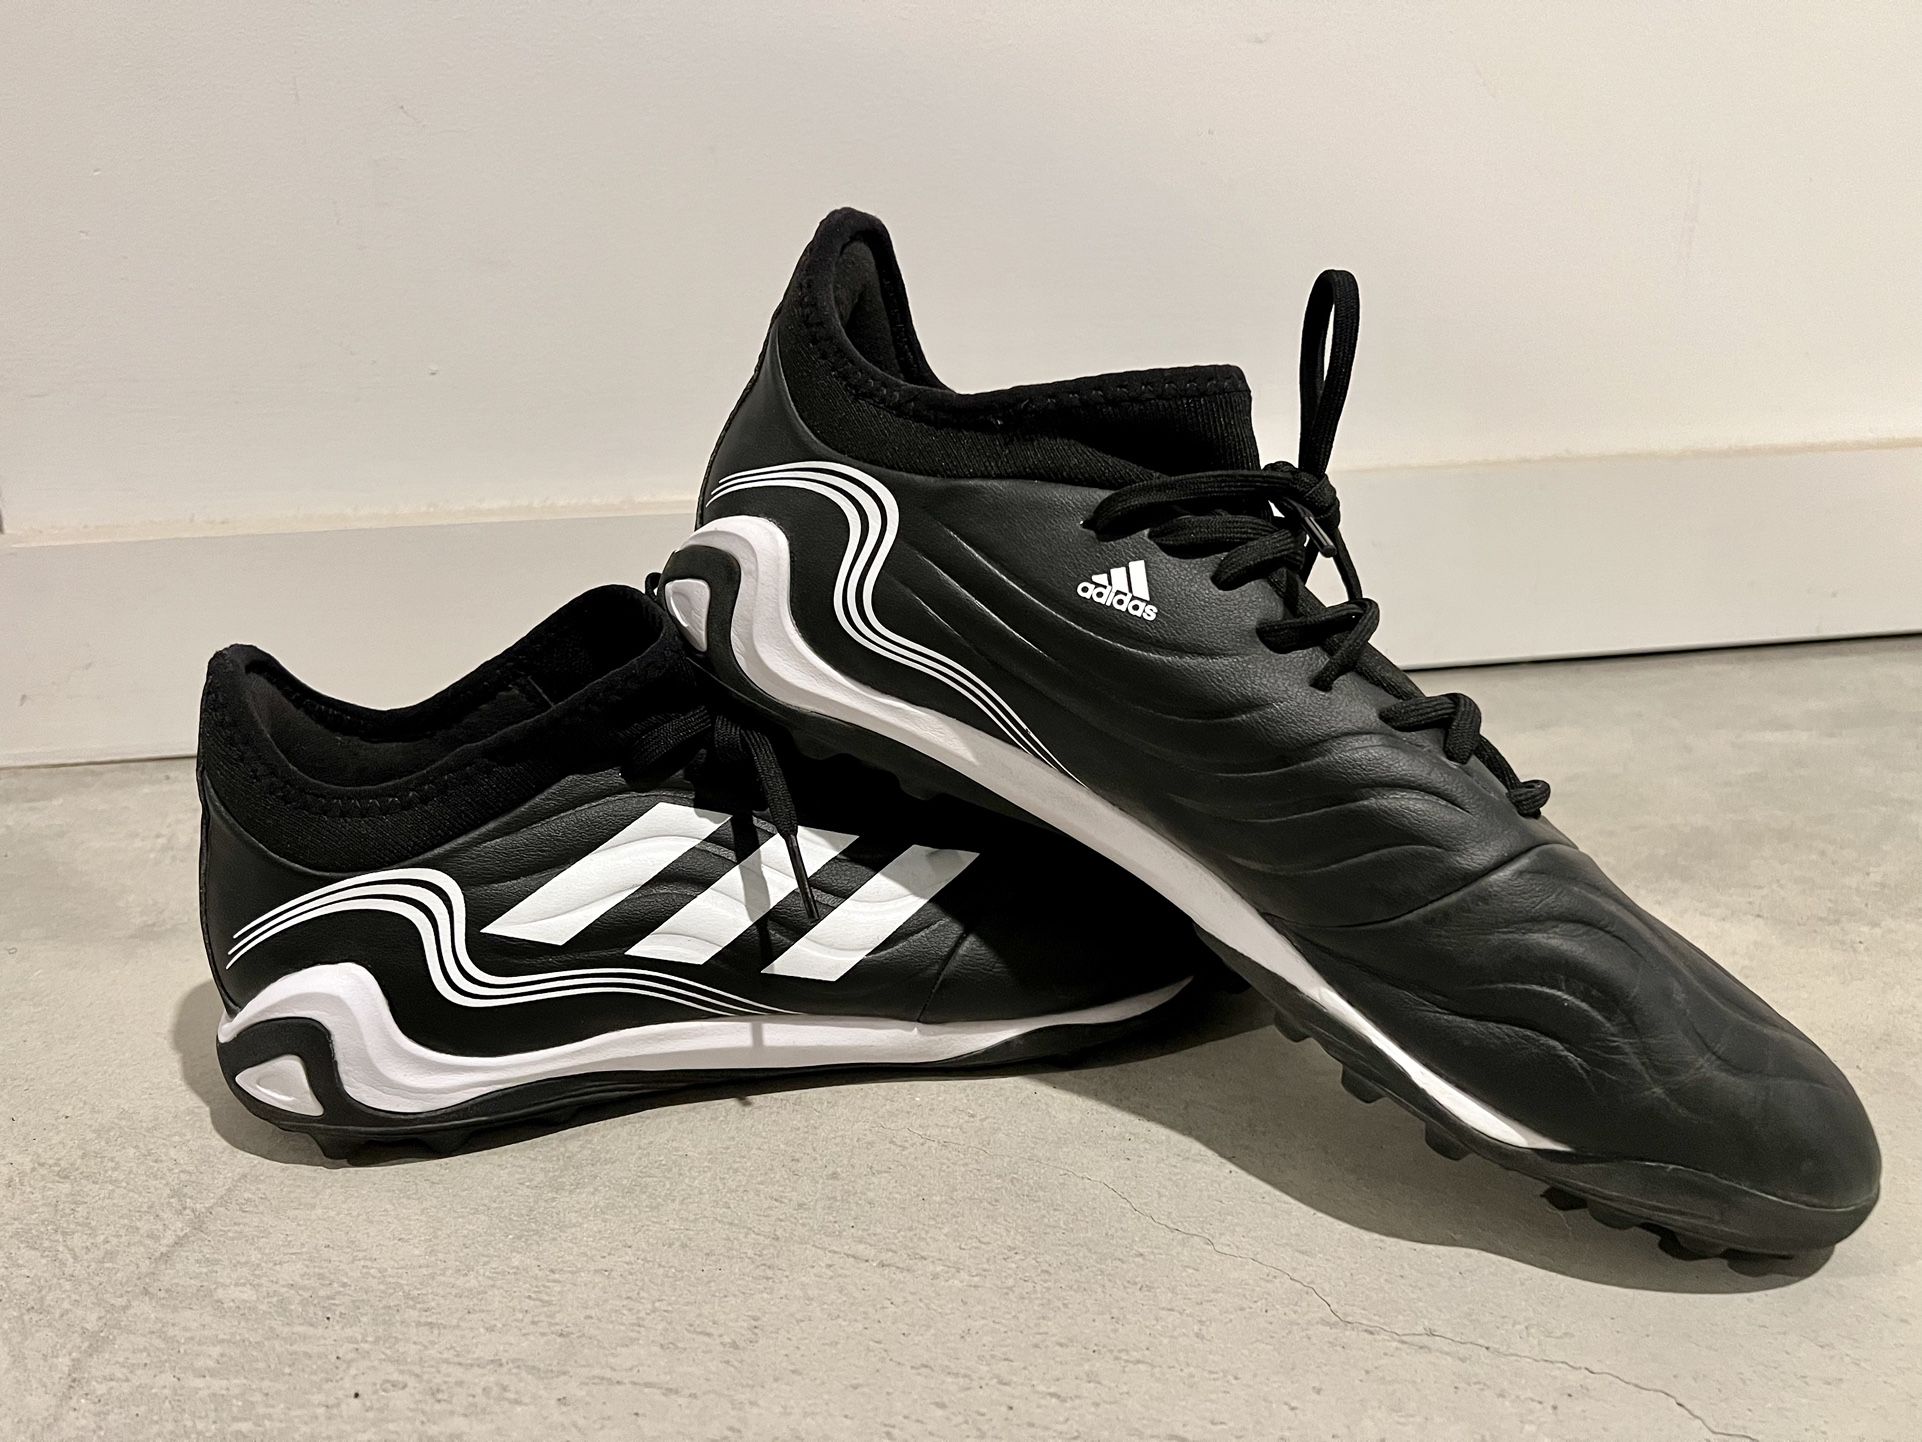 Huracán traicionar tuyo ADIDAS COPA SOCCER CLEATS - MEN'S SIZE 12.5 - WORN ONLY ONCE for Sale in  Playa Del Rey, CA - OfferUp